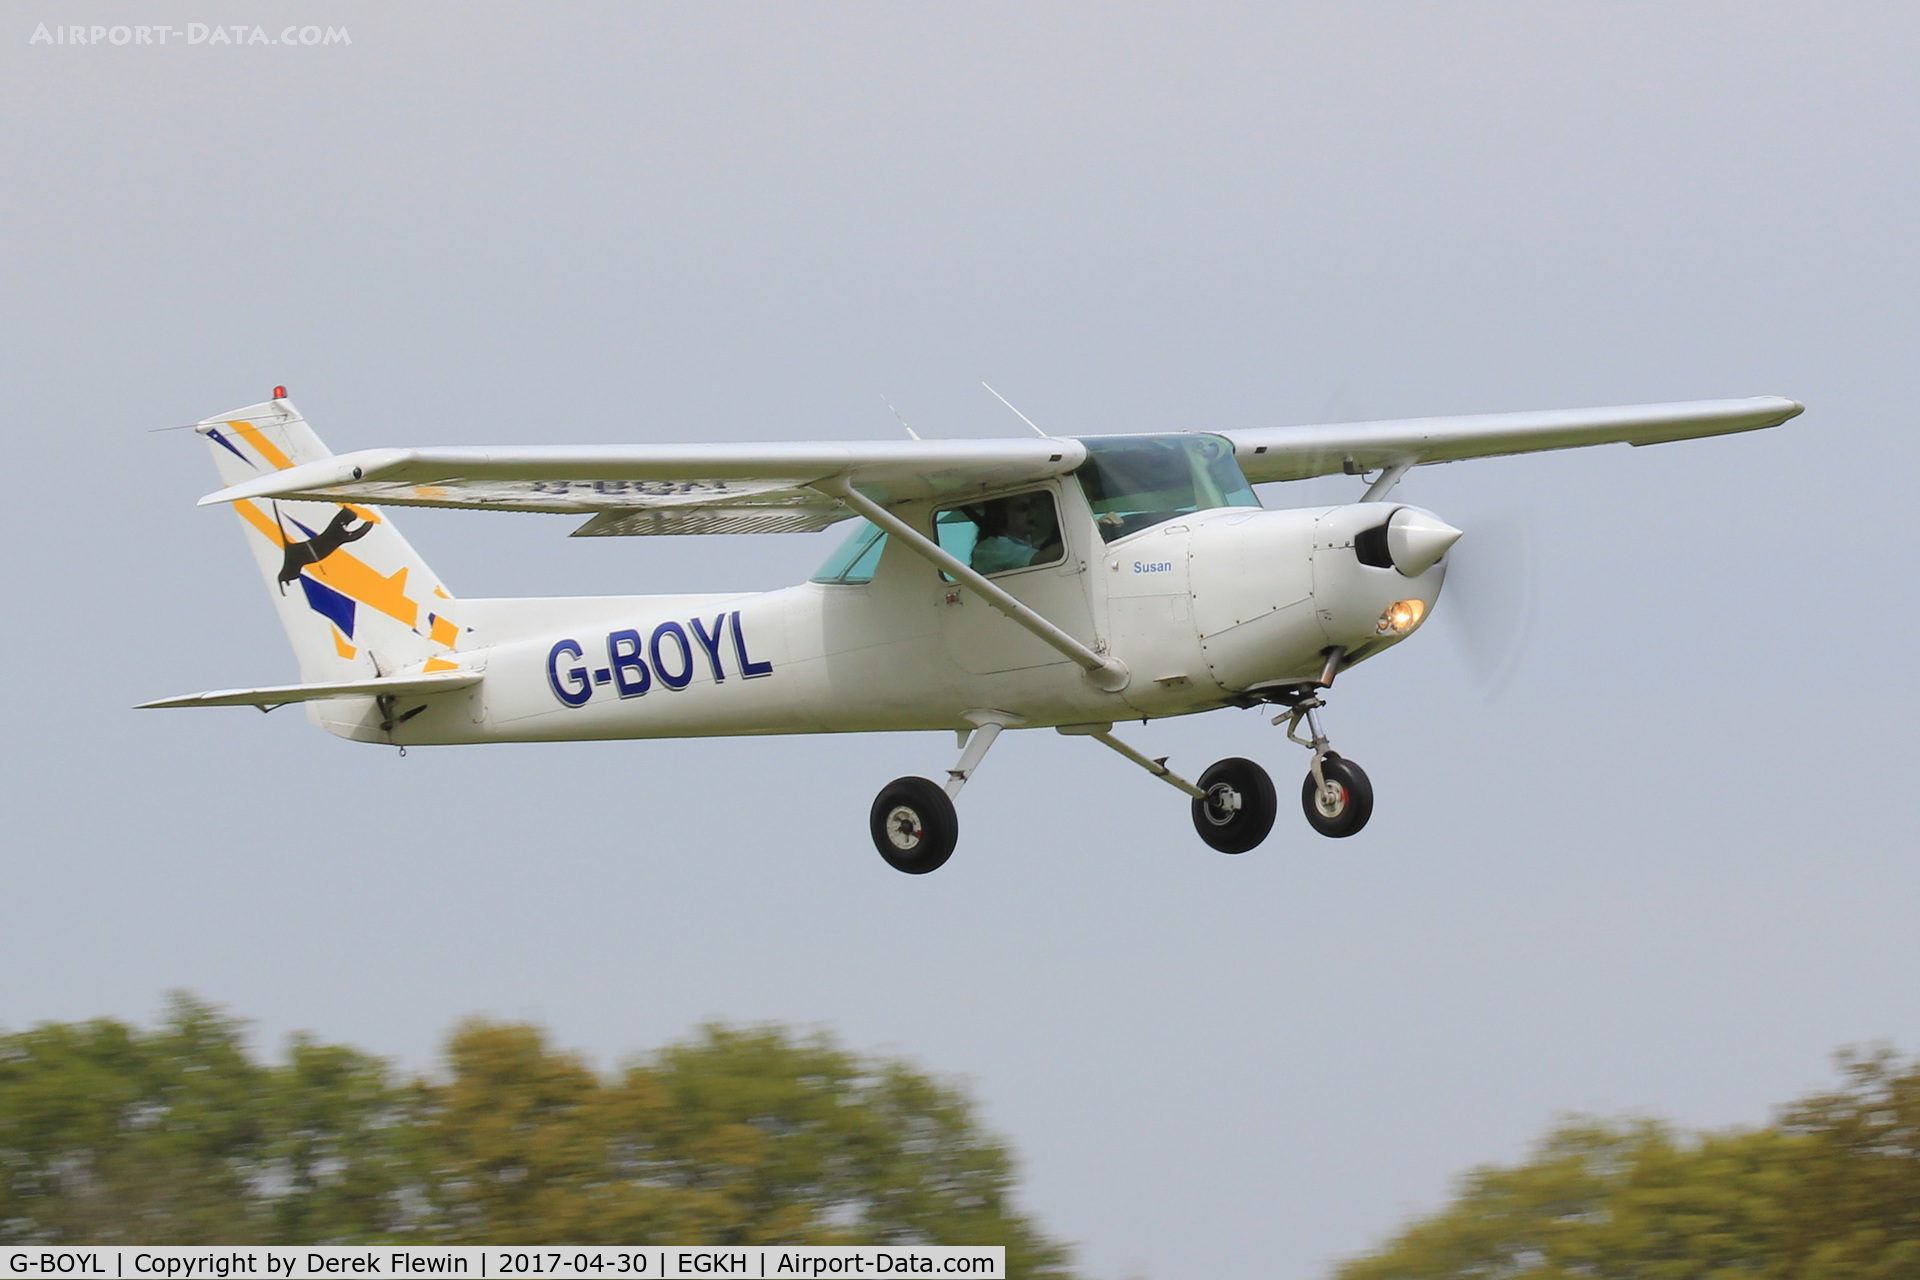 G-BOYL, 1980 Cessna 152 C/N 152-84379, Cessna 152, Redhill Air Services Ltd redhill Surrey based, previously N6232L, seen departing runway 10.